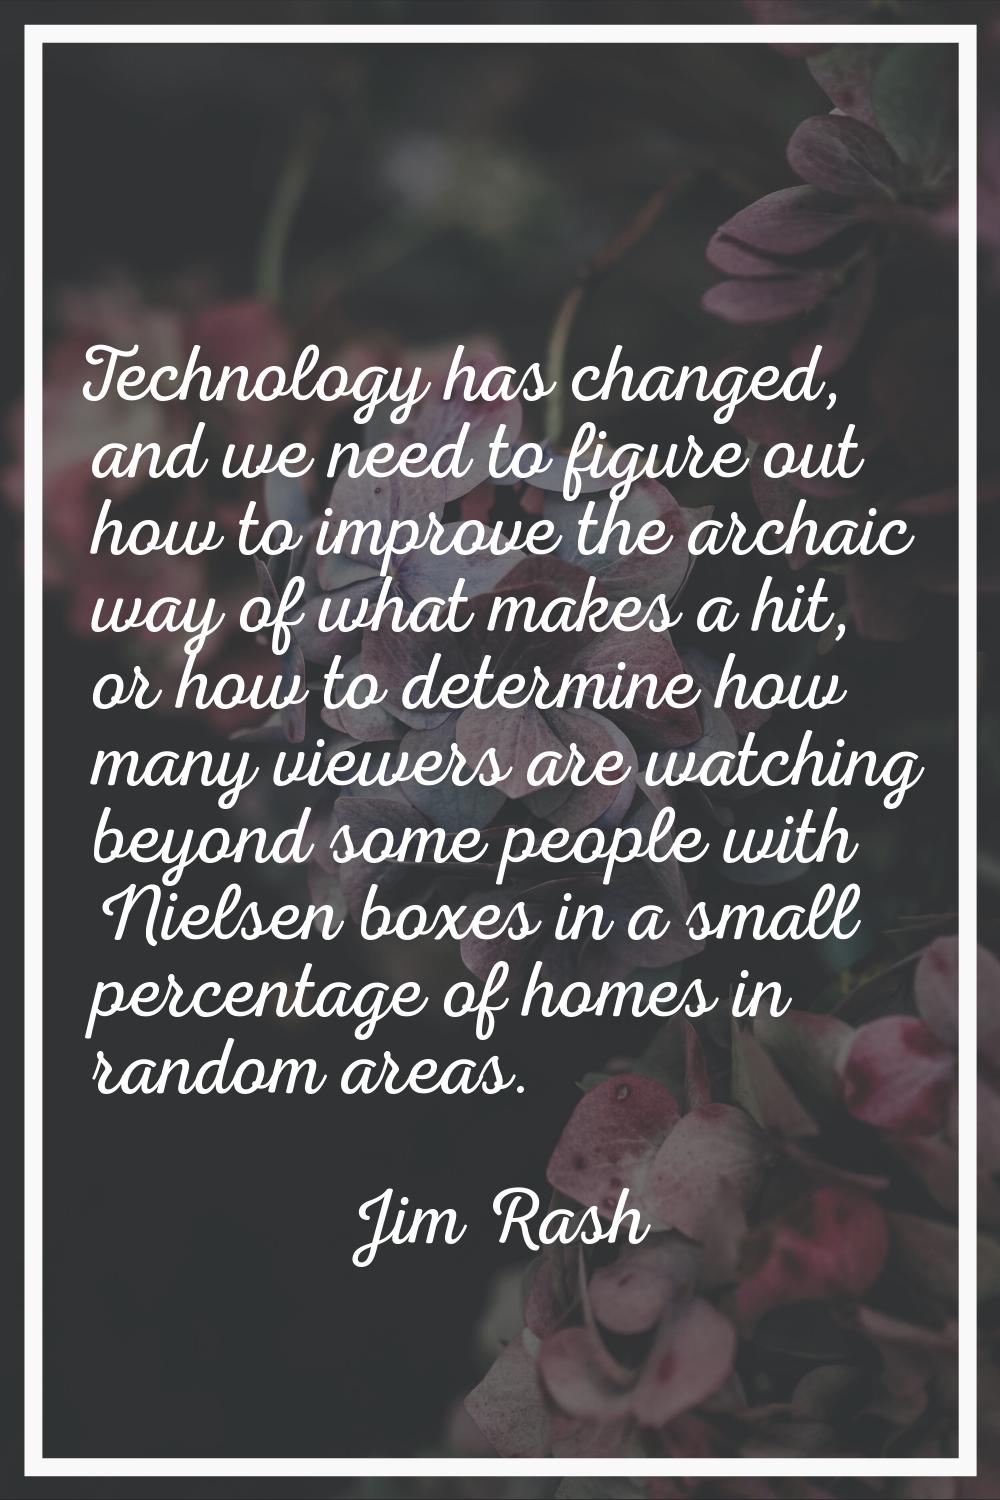 Technology has changed, and we need to figure out how to improve the archaic way of what makes a hi